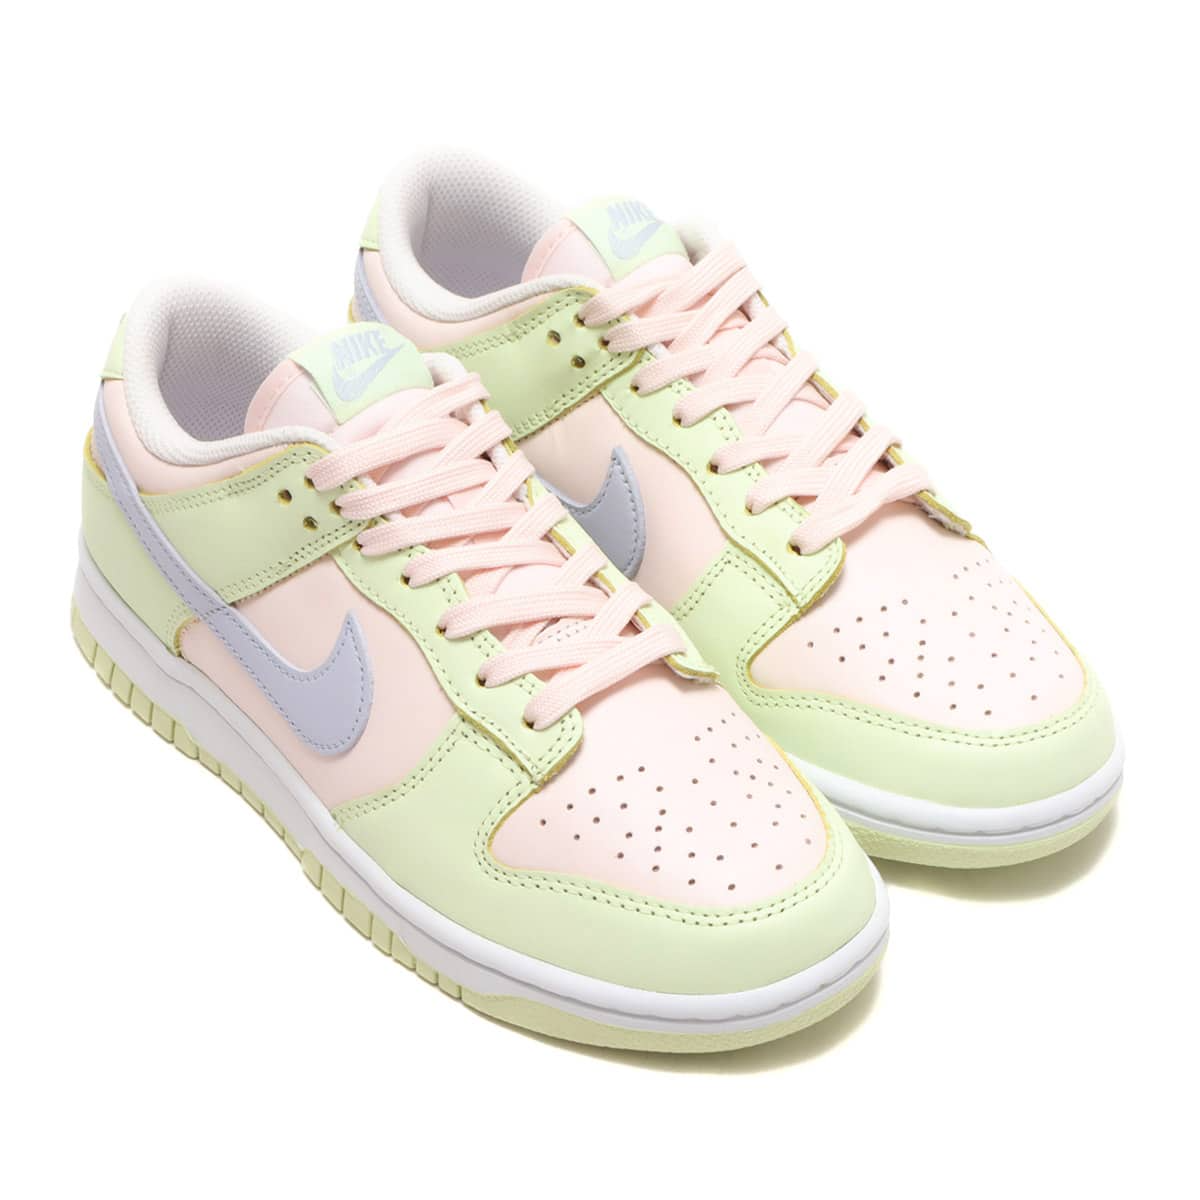 Nike Dunk Low Soft Pink Trainers Womens